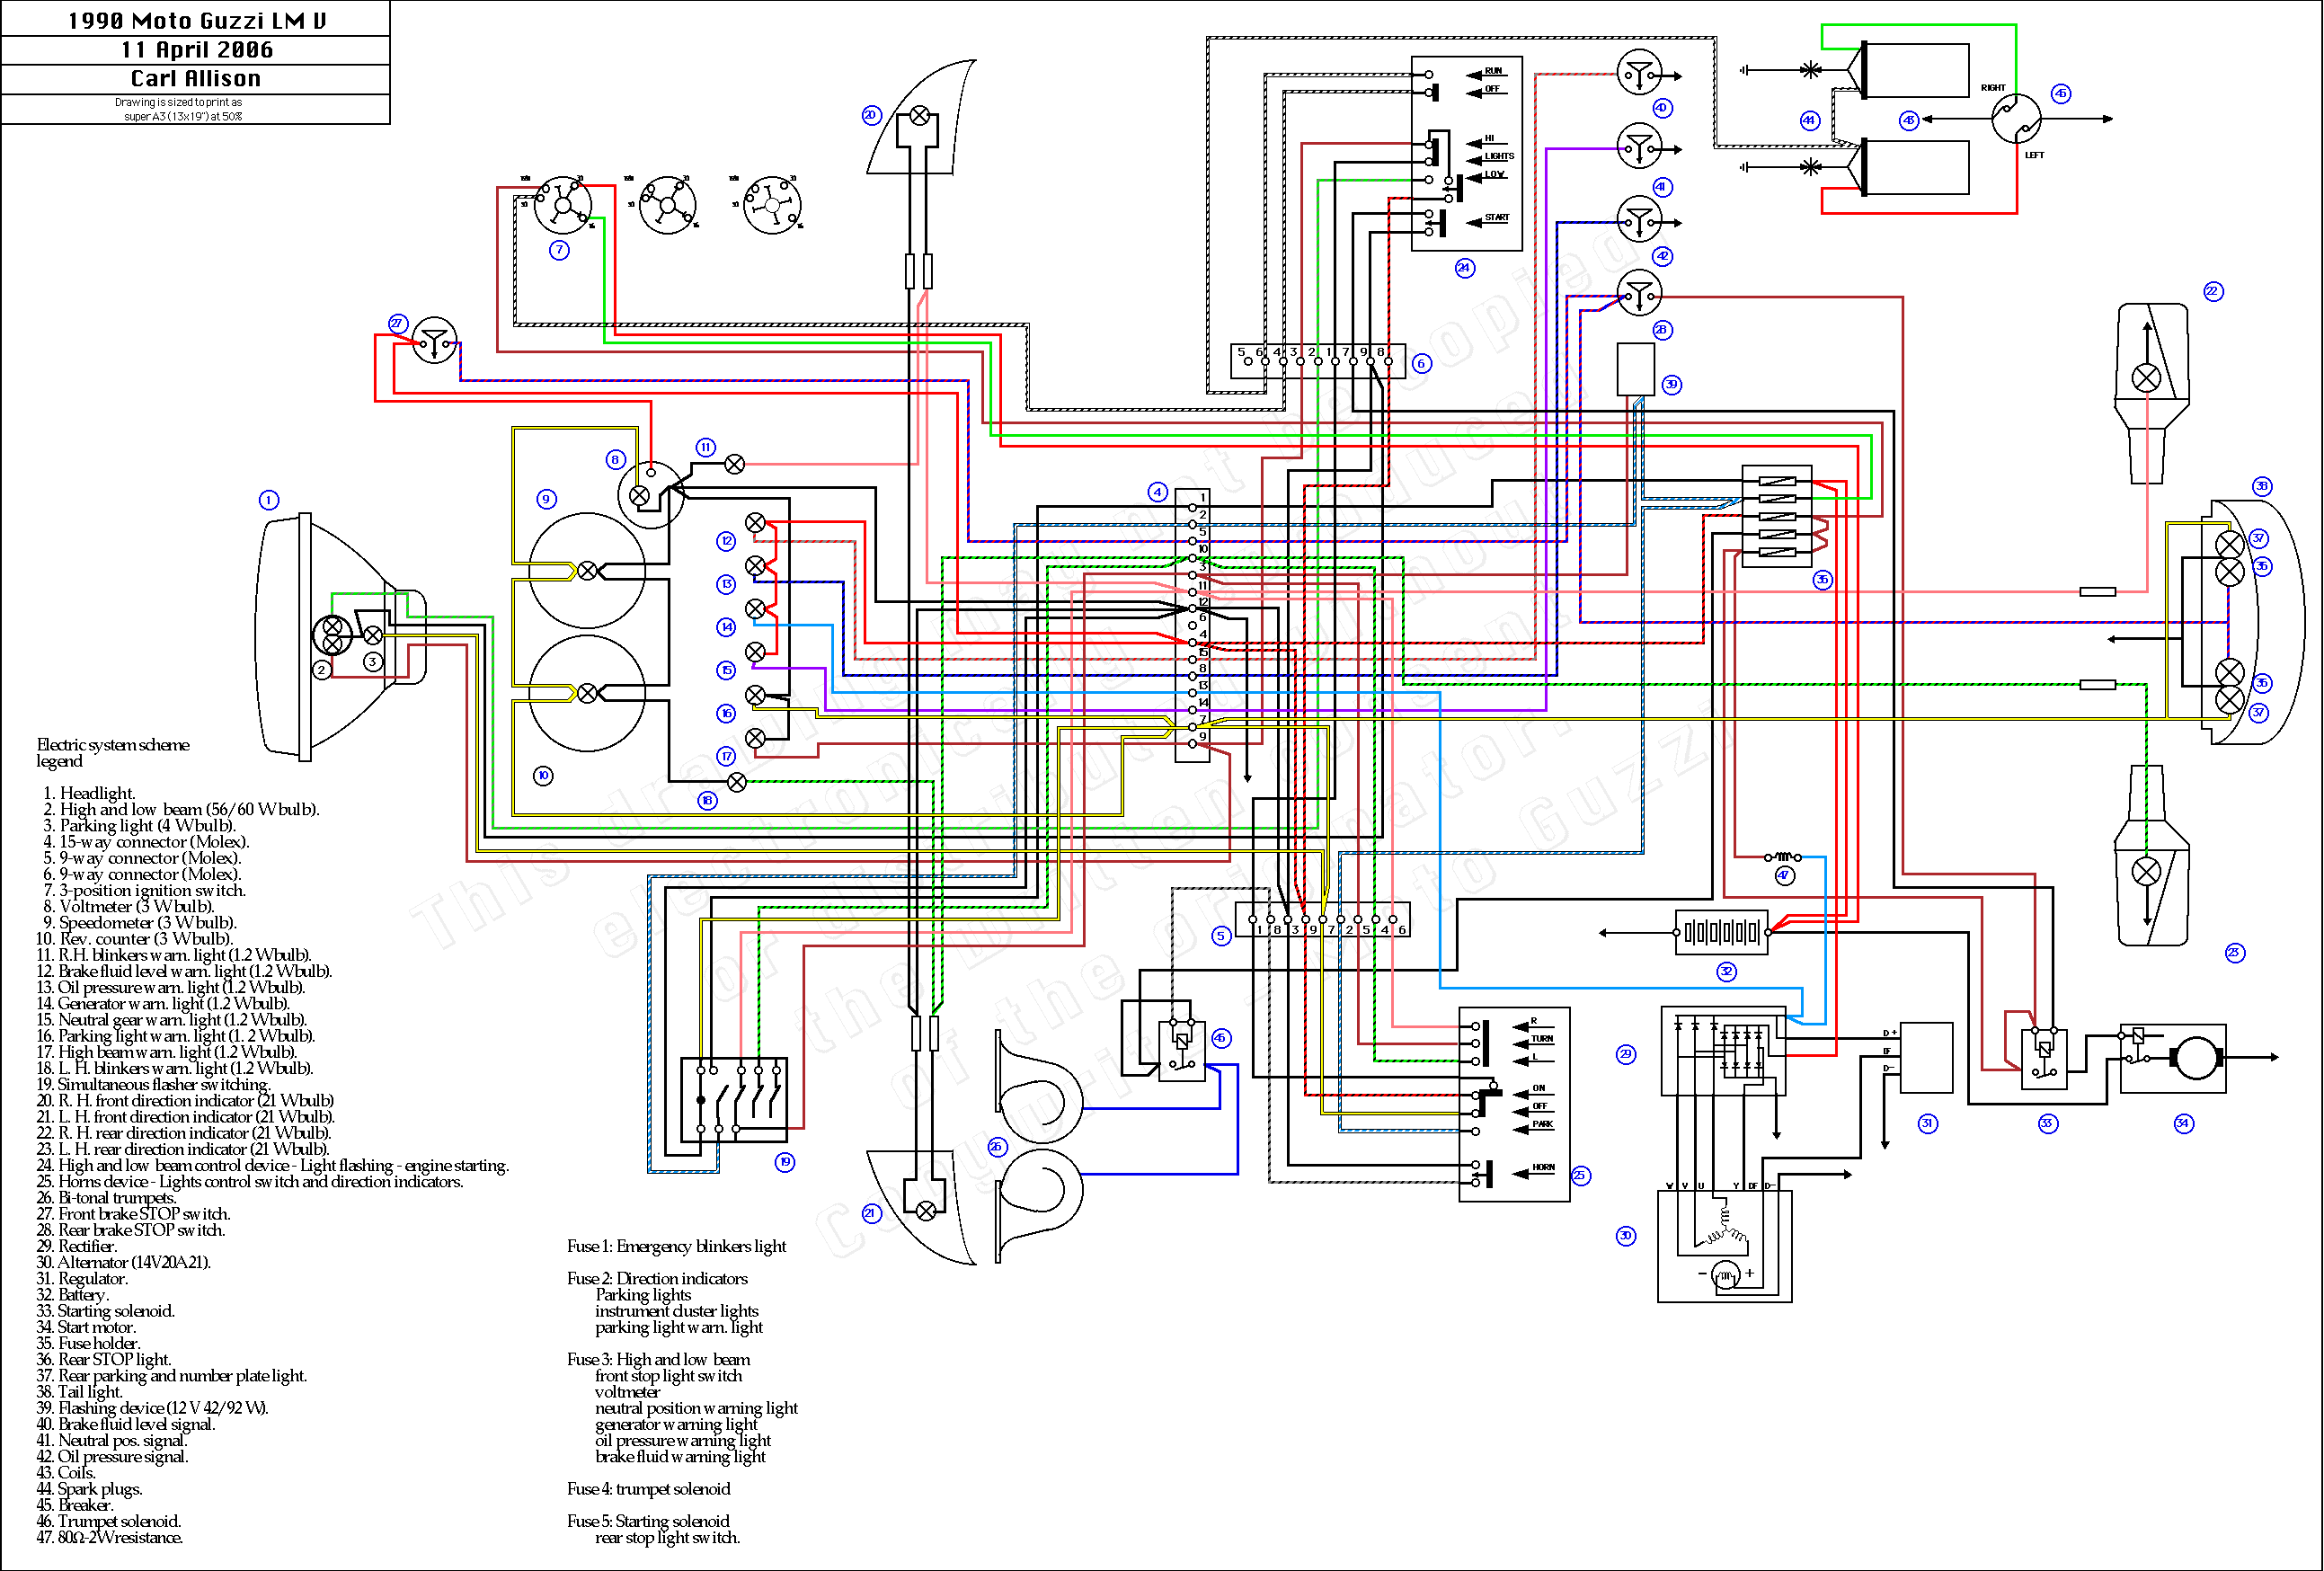 05 Honda Accord Parking Lights Wiring Diagram from www.thisoldtractor.com